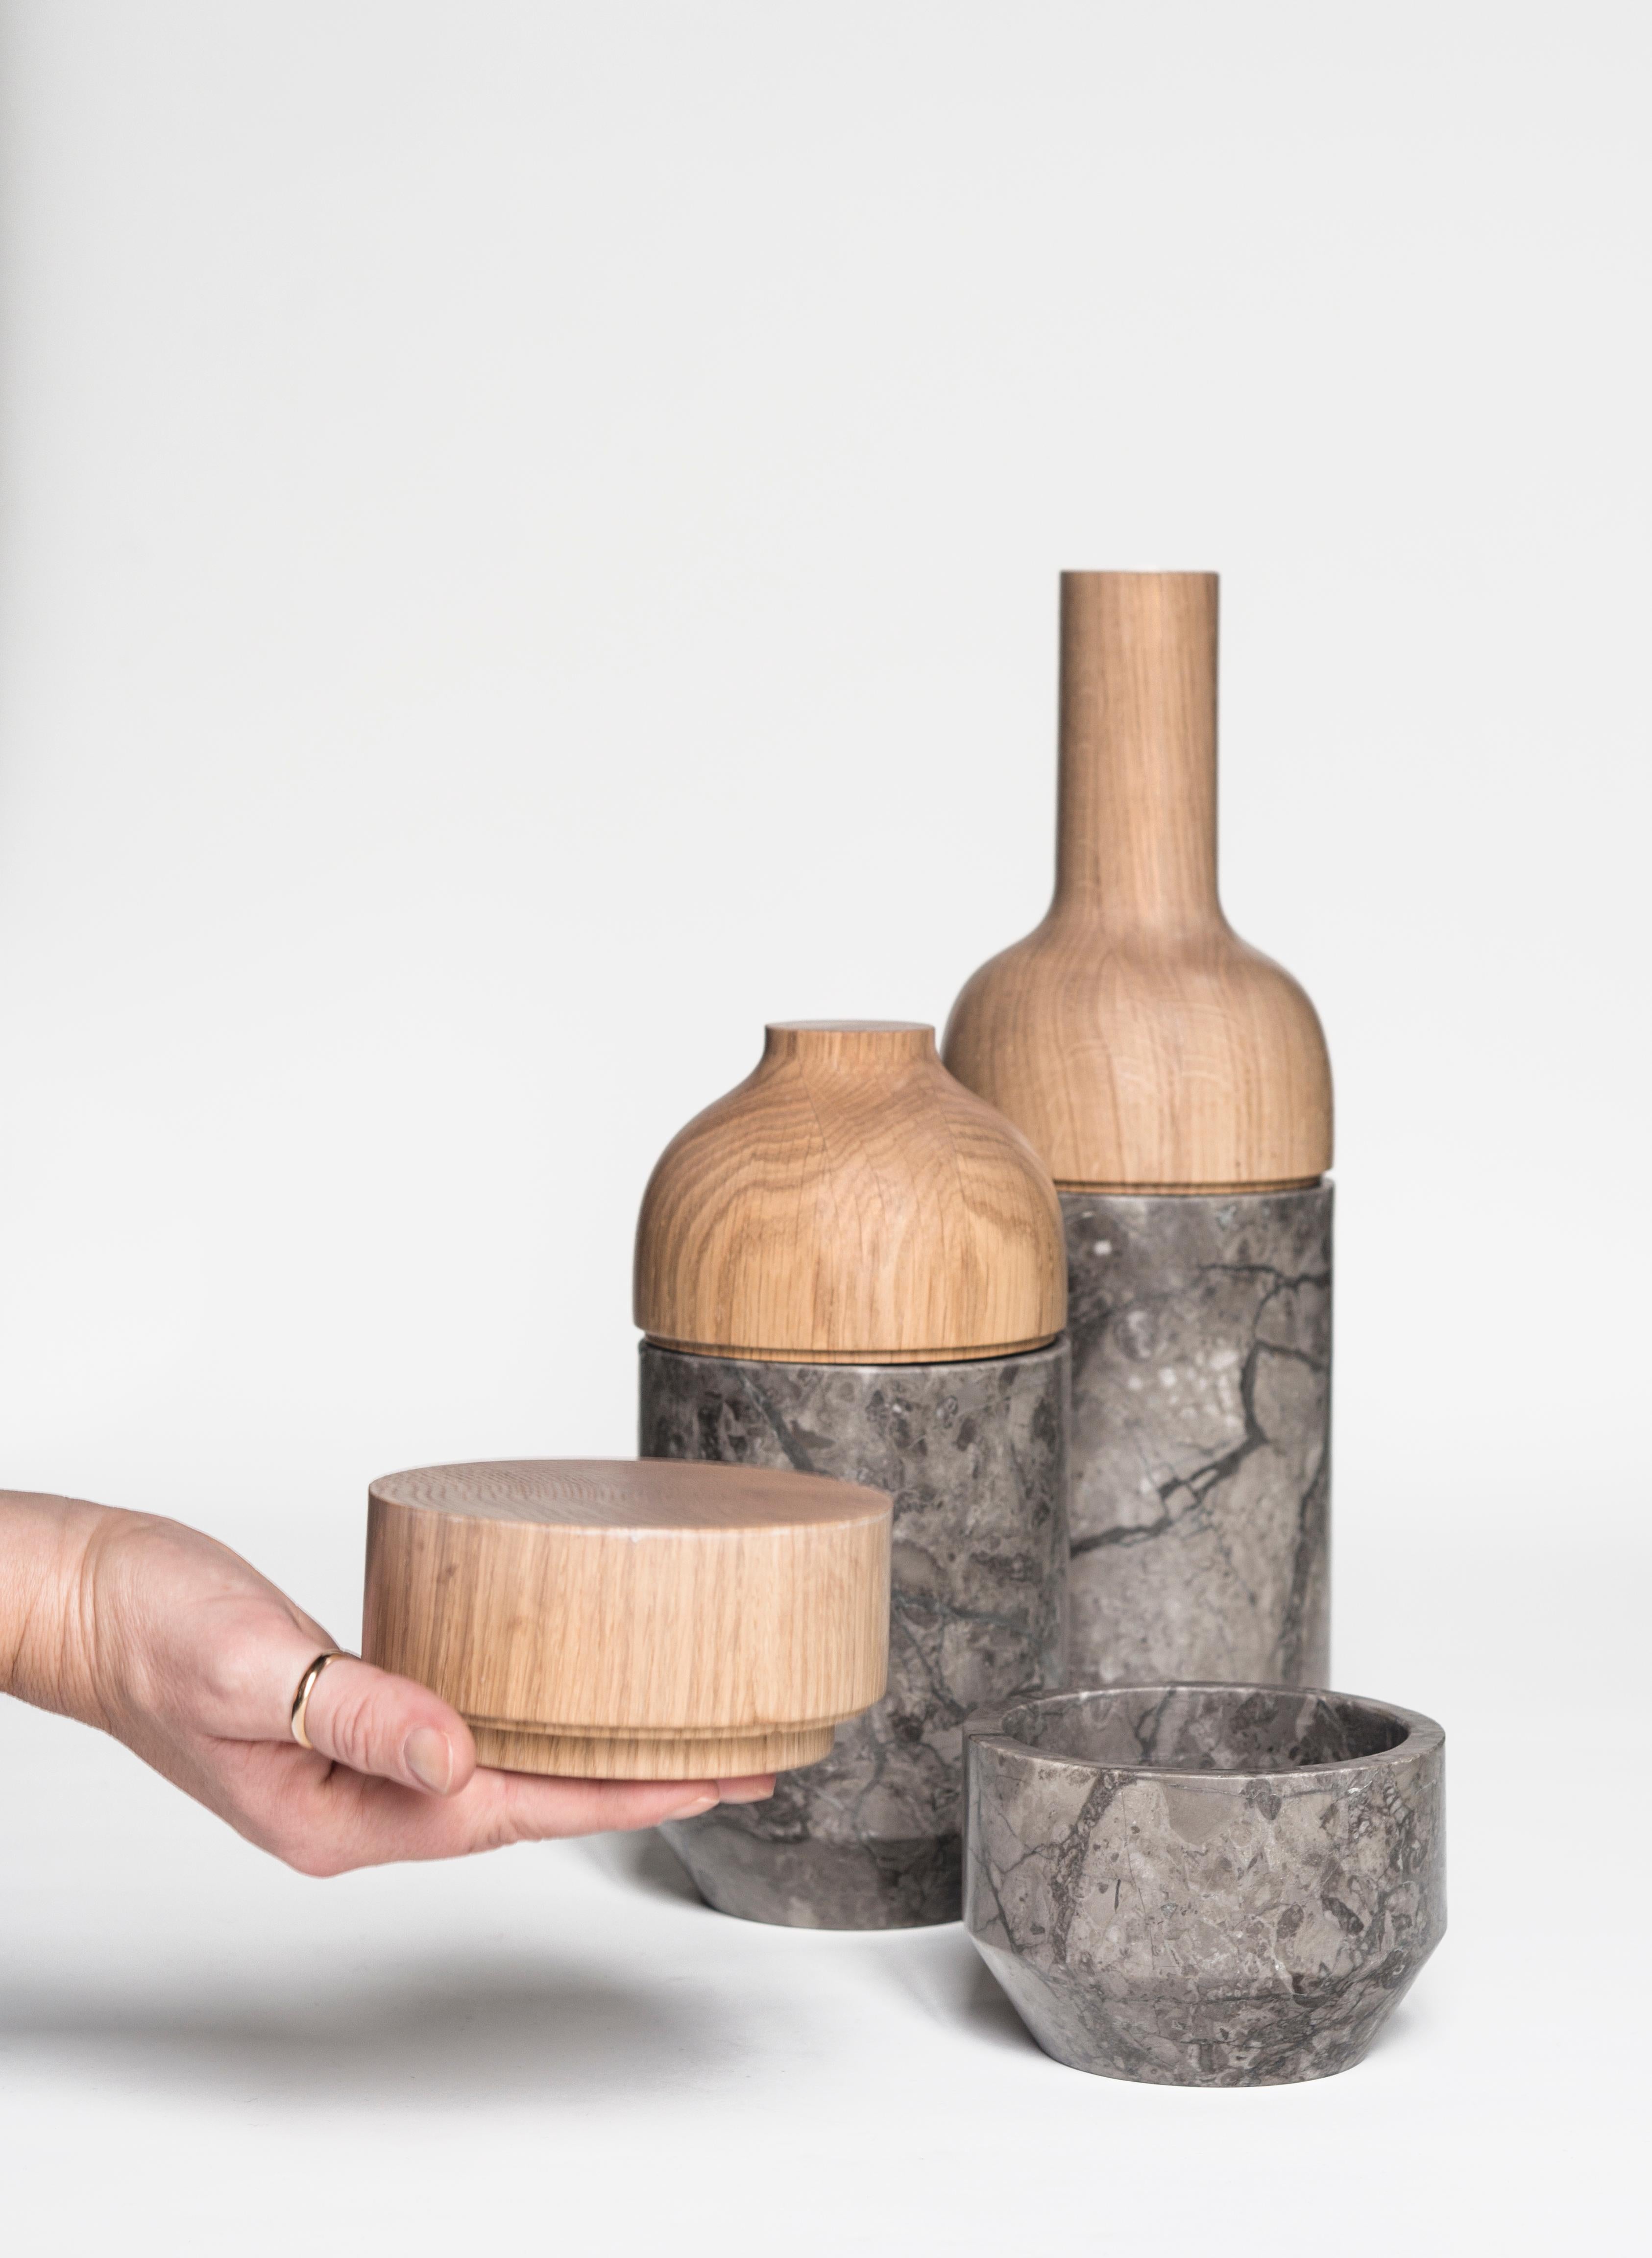 Aggregated stone by geological stratifications and natural wood form an emotional collection of containers that have in their being the becoming. Formal interpretation of the individual's condition, which through experience defines its essence. The